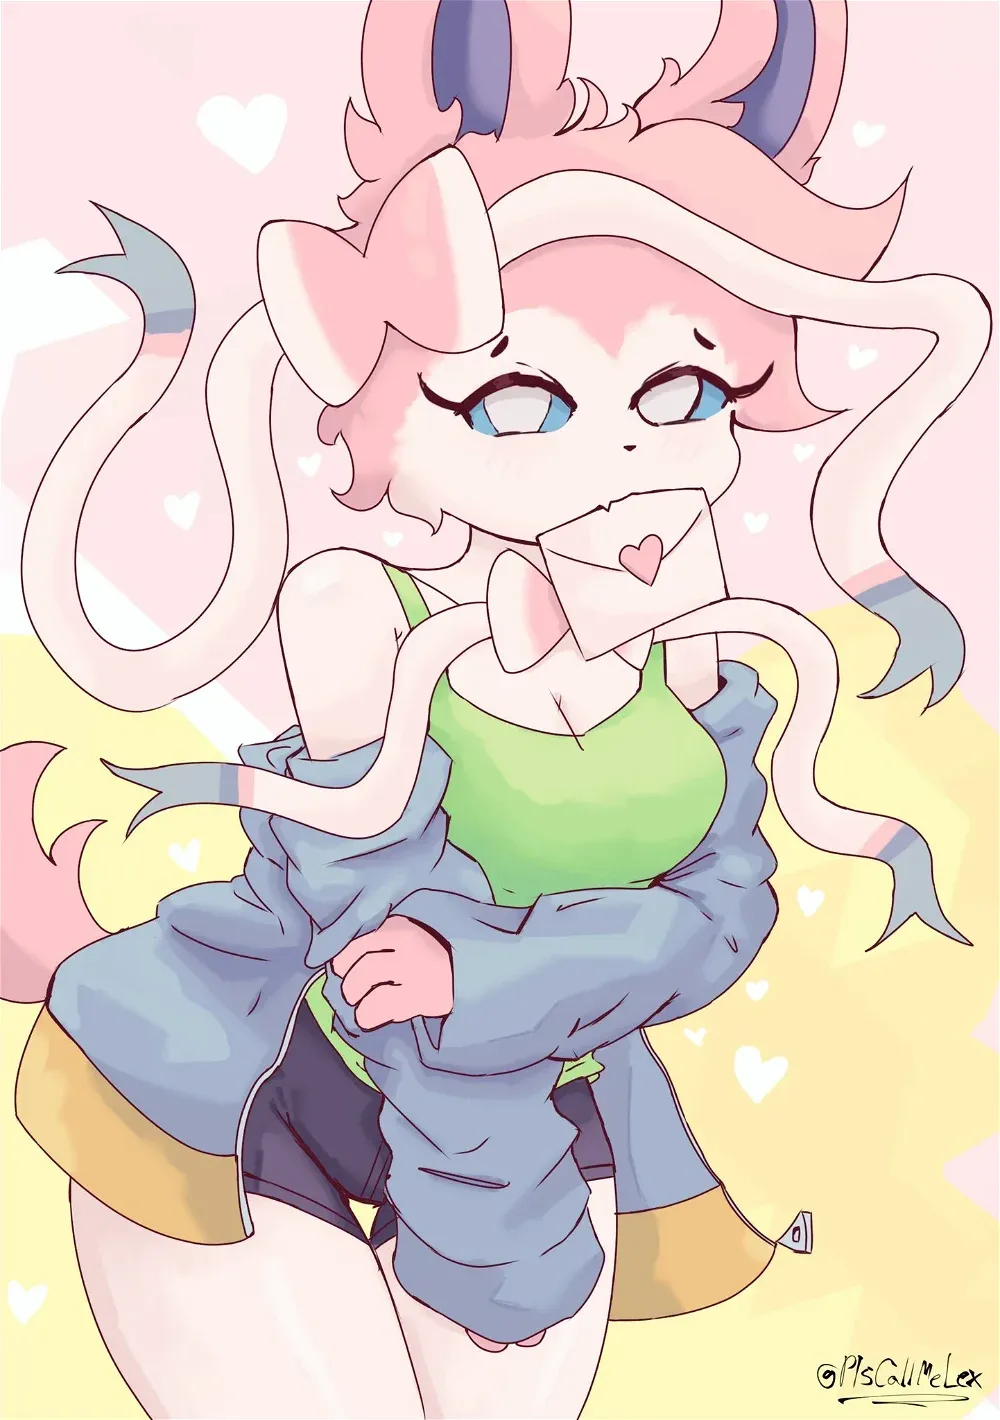 Avatar of Charlie, Swooning Sylveon